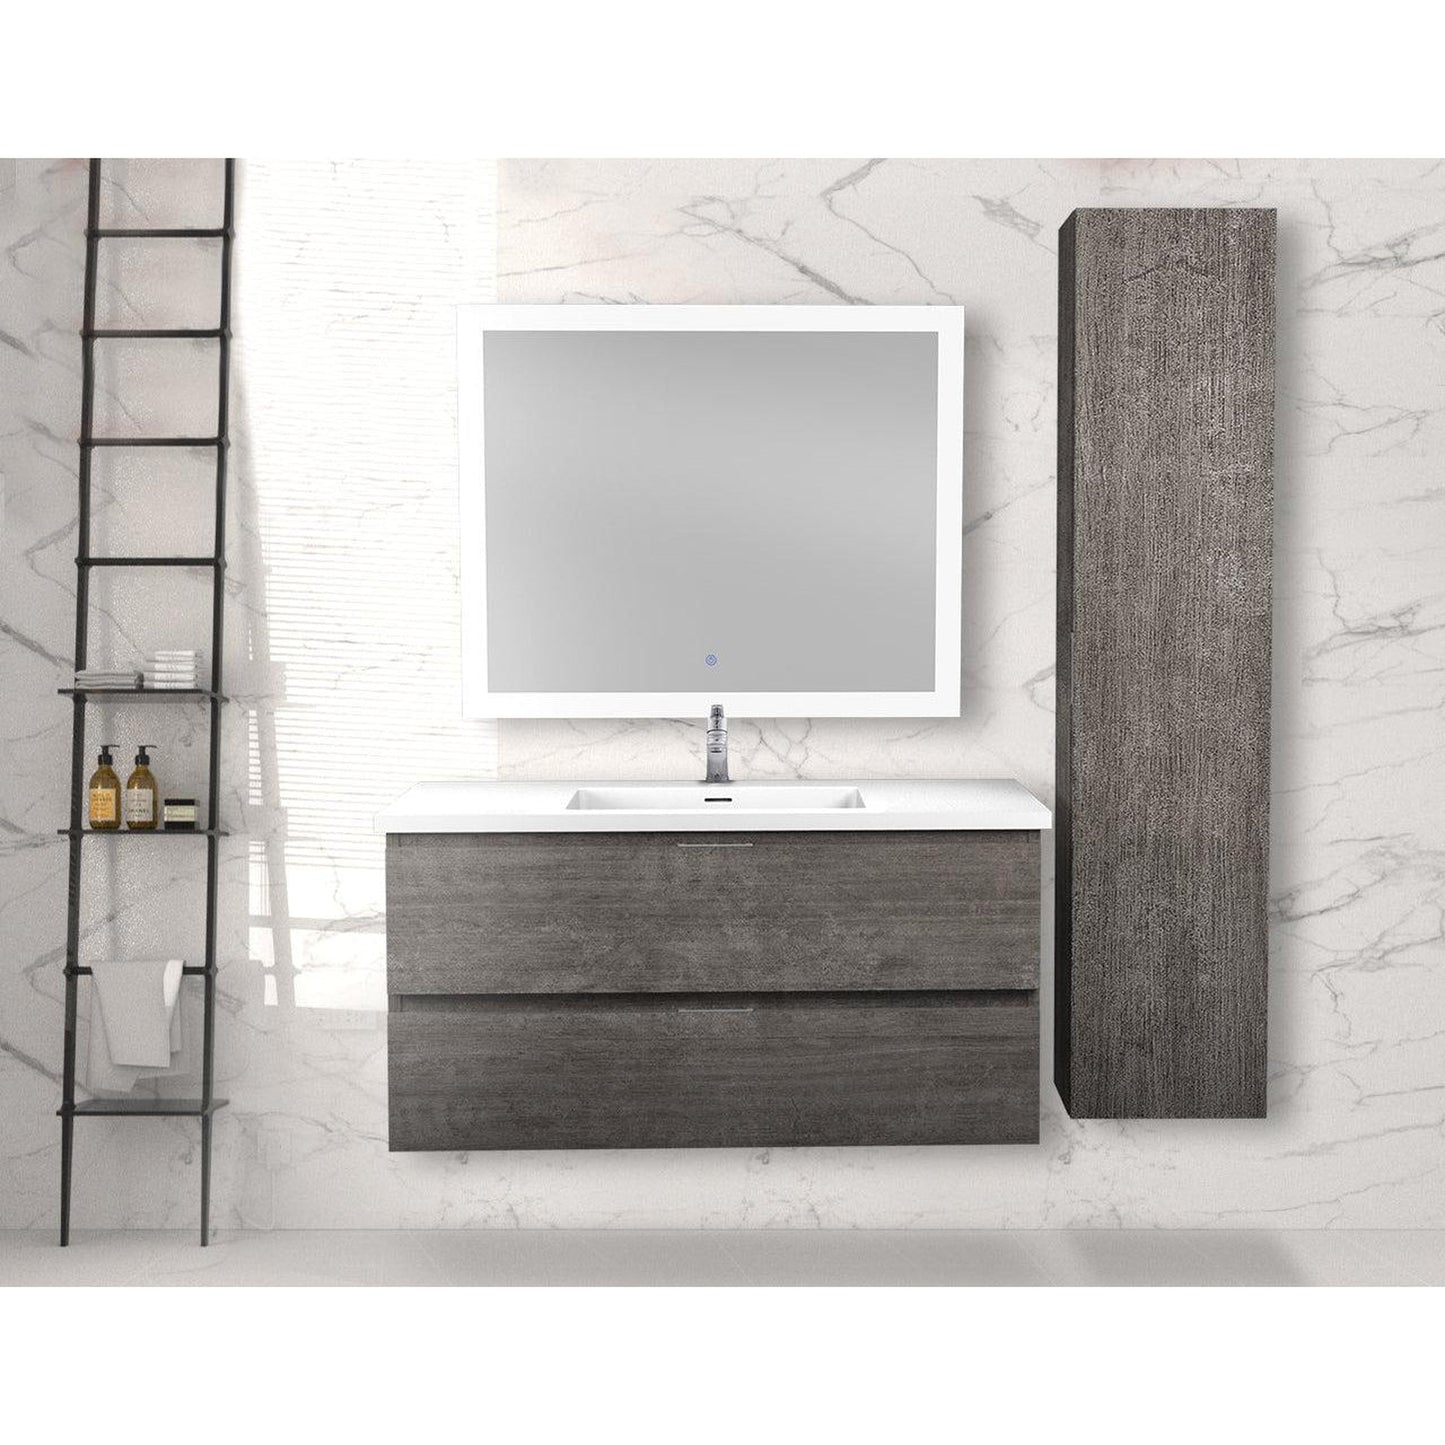 ANZZI Conques 39" x 20" Rich Gray Solid Wood Bathroom Vanity With Glossy White Countertop With Sink, 39" LED Mirror and Side Cabinet